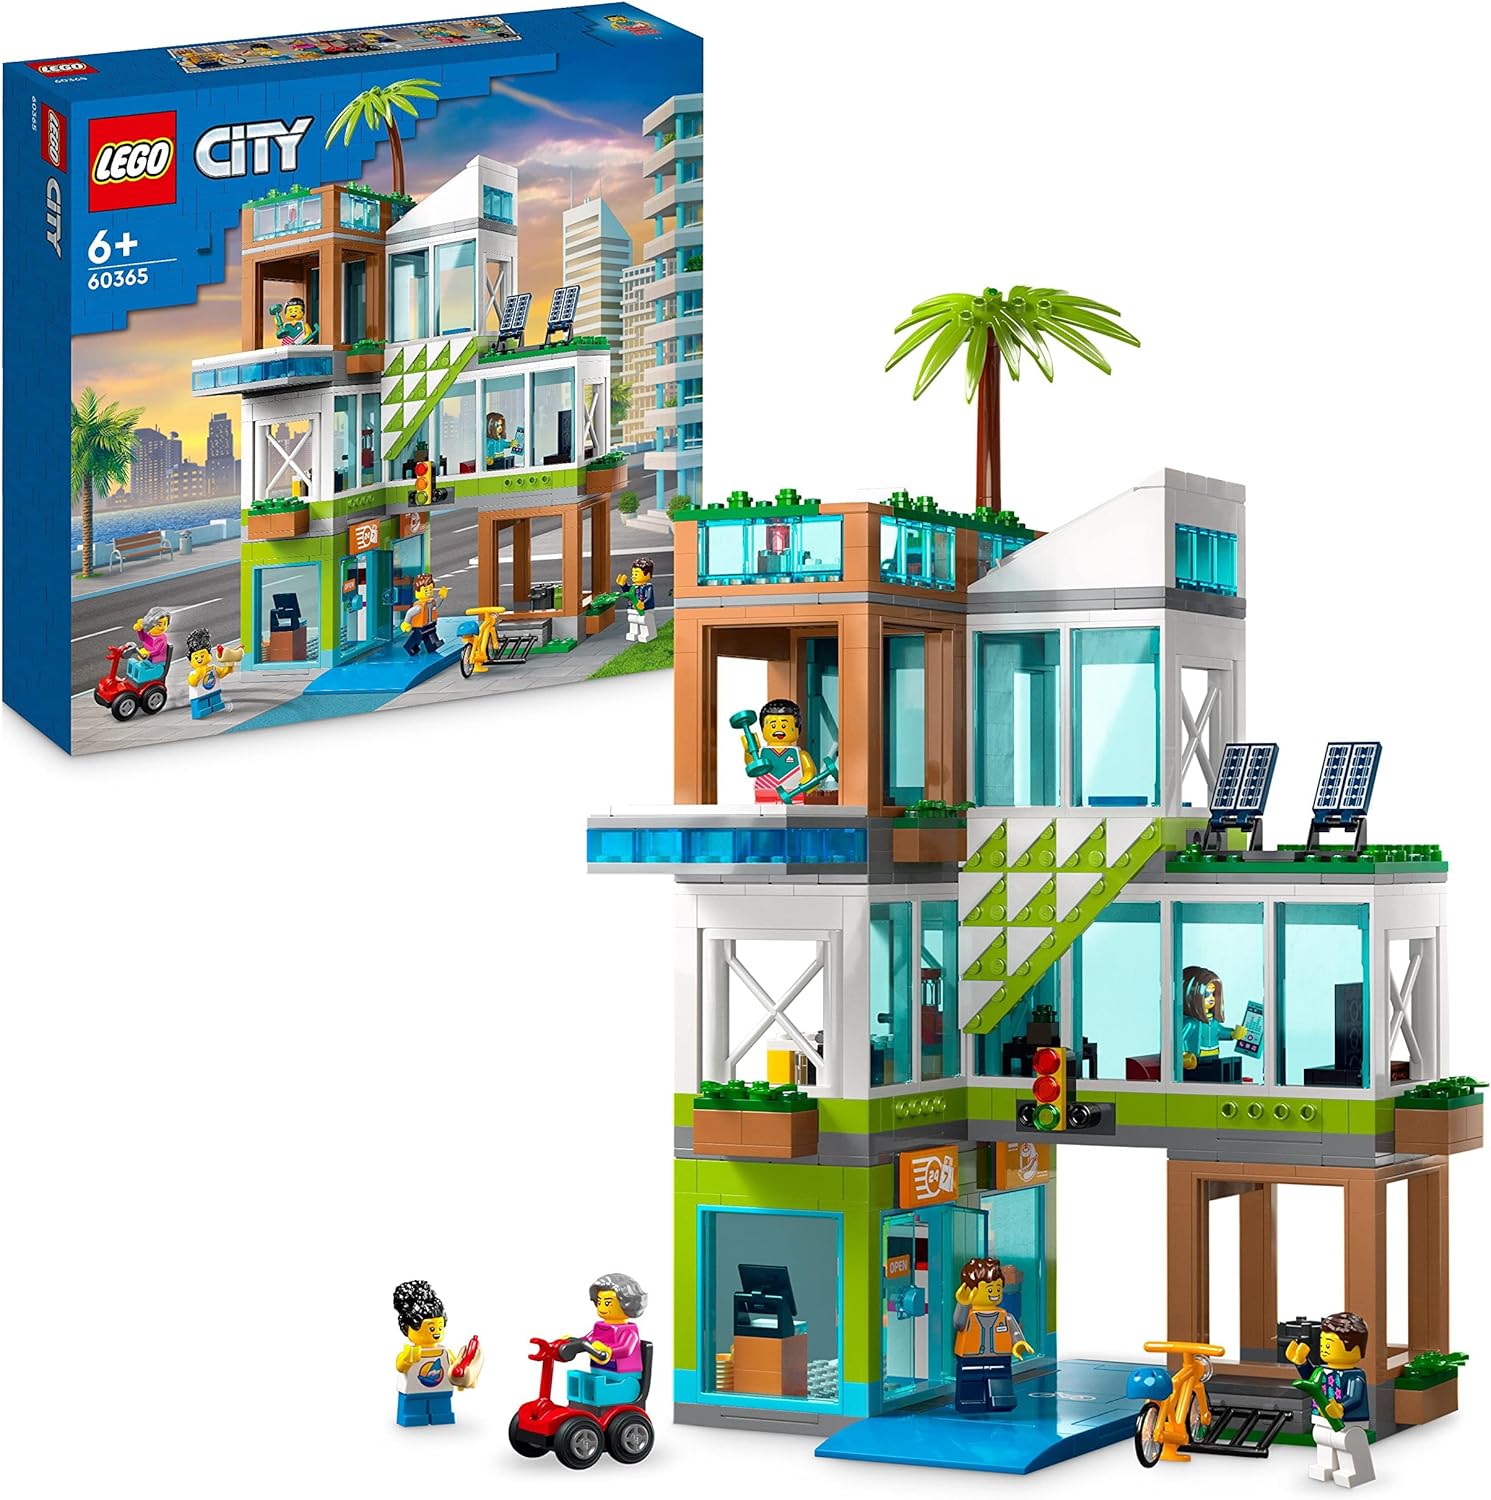 LEGO City Apartment House Set, Construction Toy With Corner Shop, Living Room, Kitchen and Bedroom, With Scooter, Bike, 6 Mini Figures and A Street Plate 60365